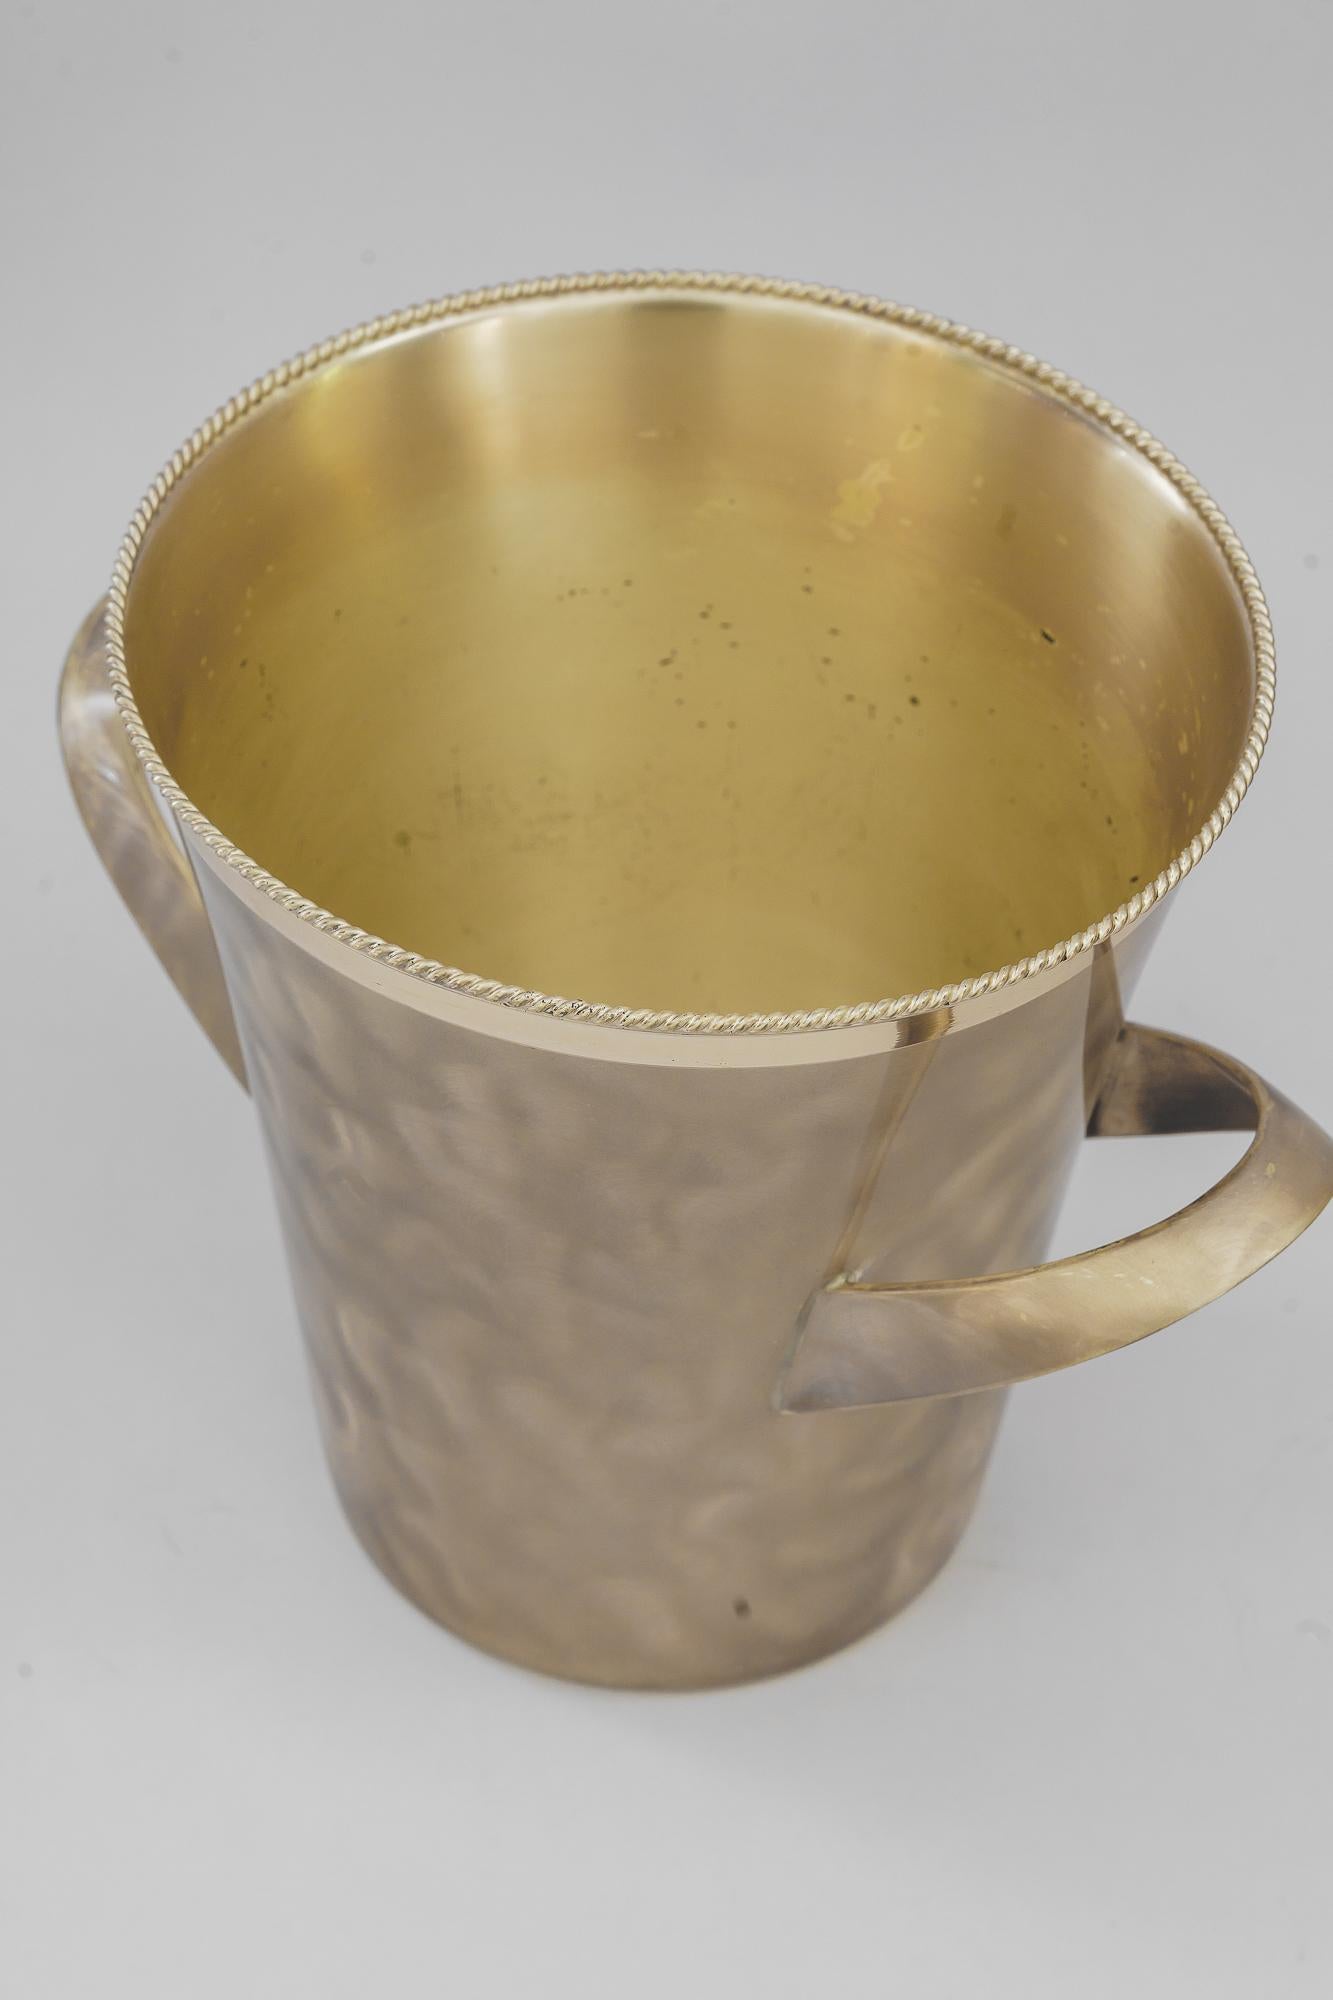 Mid-Century Modern Silvered Art Deco Champagne Cooler, by Kurt Mayer 1960s ( marked by WMF ) For Sale